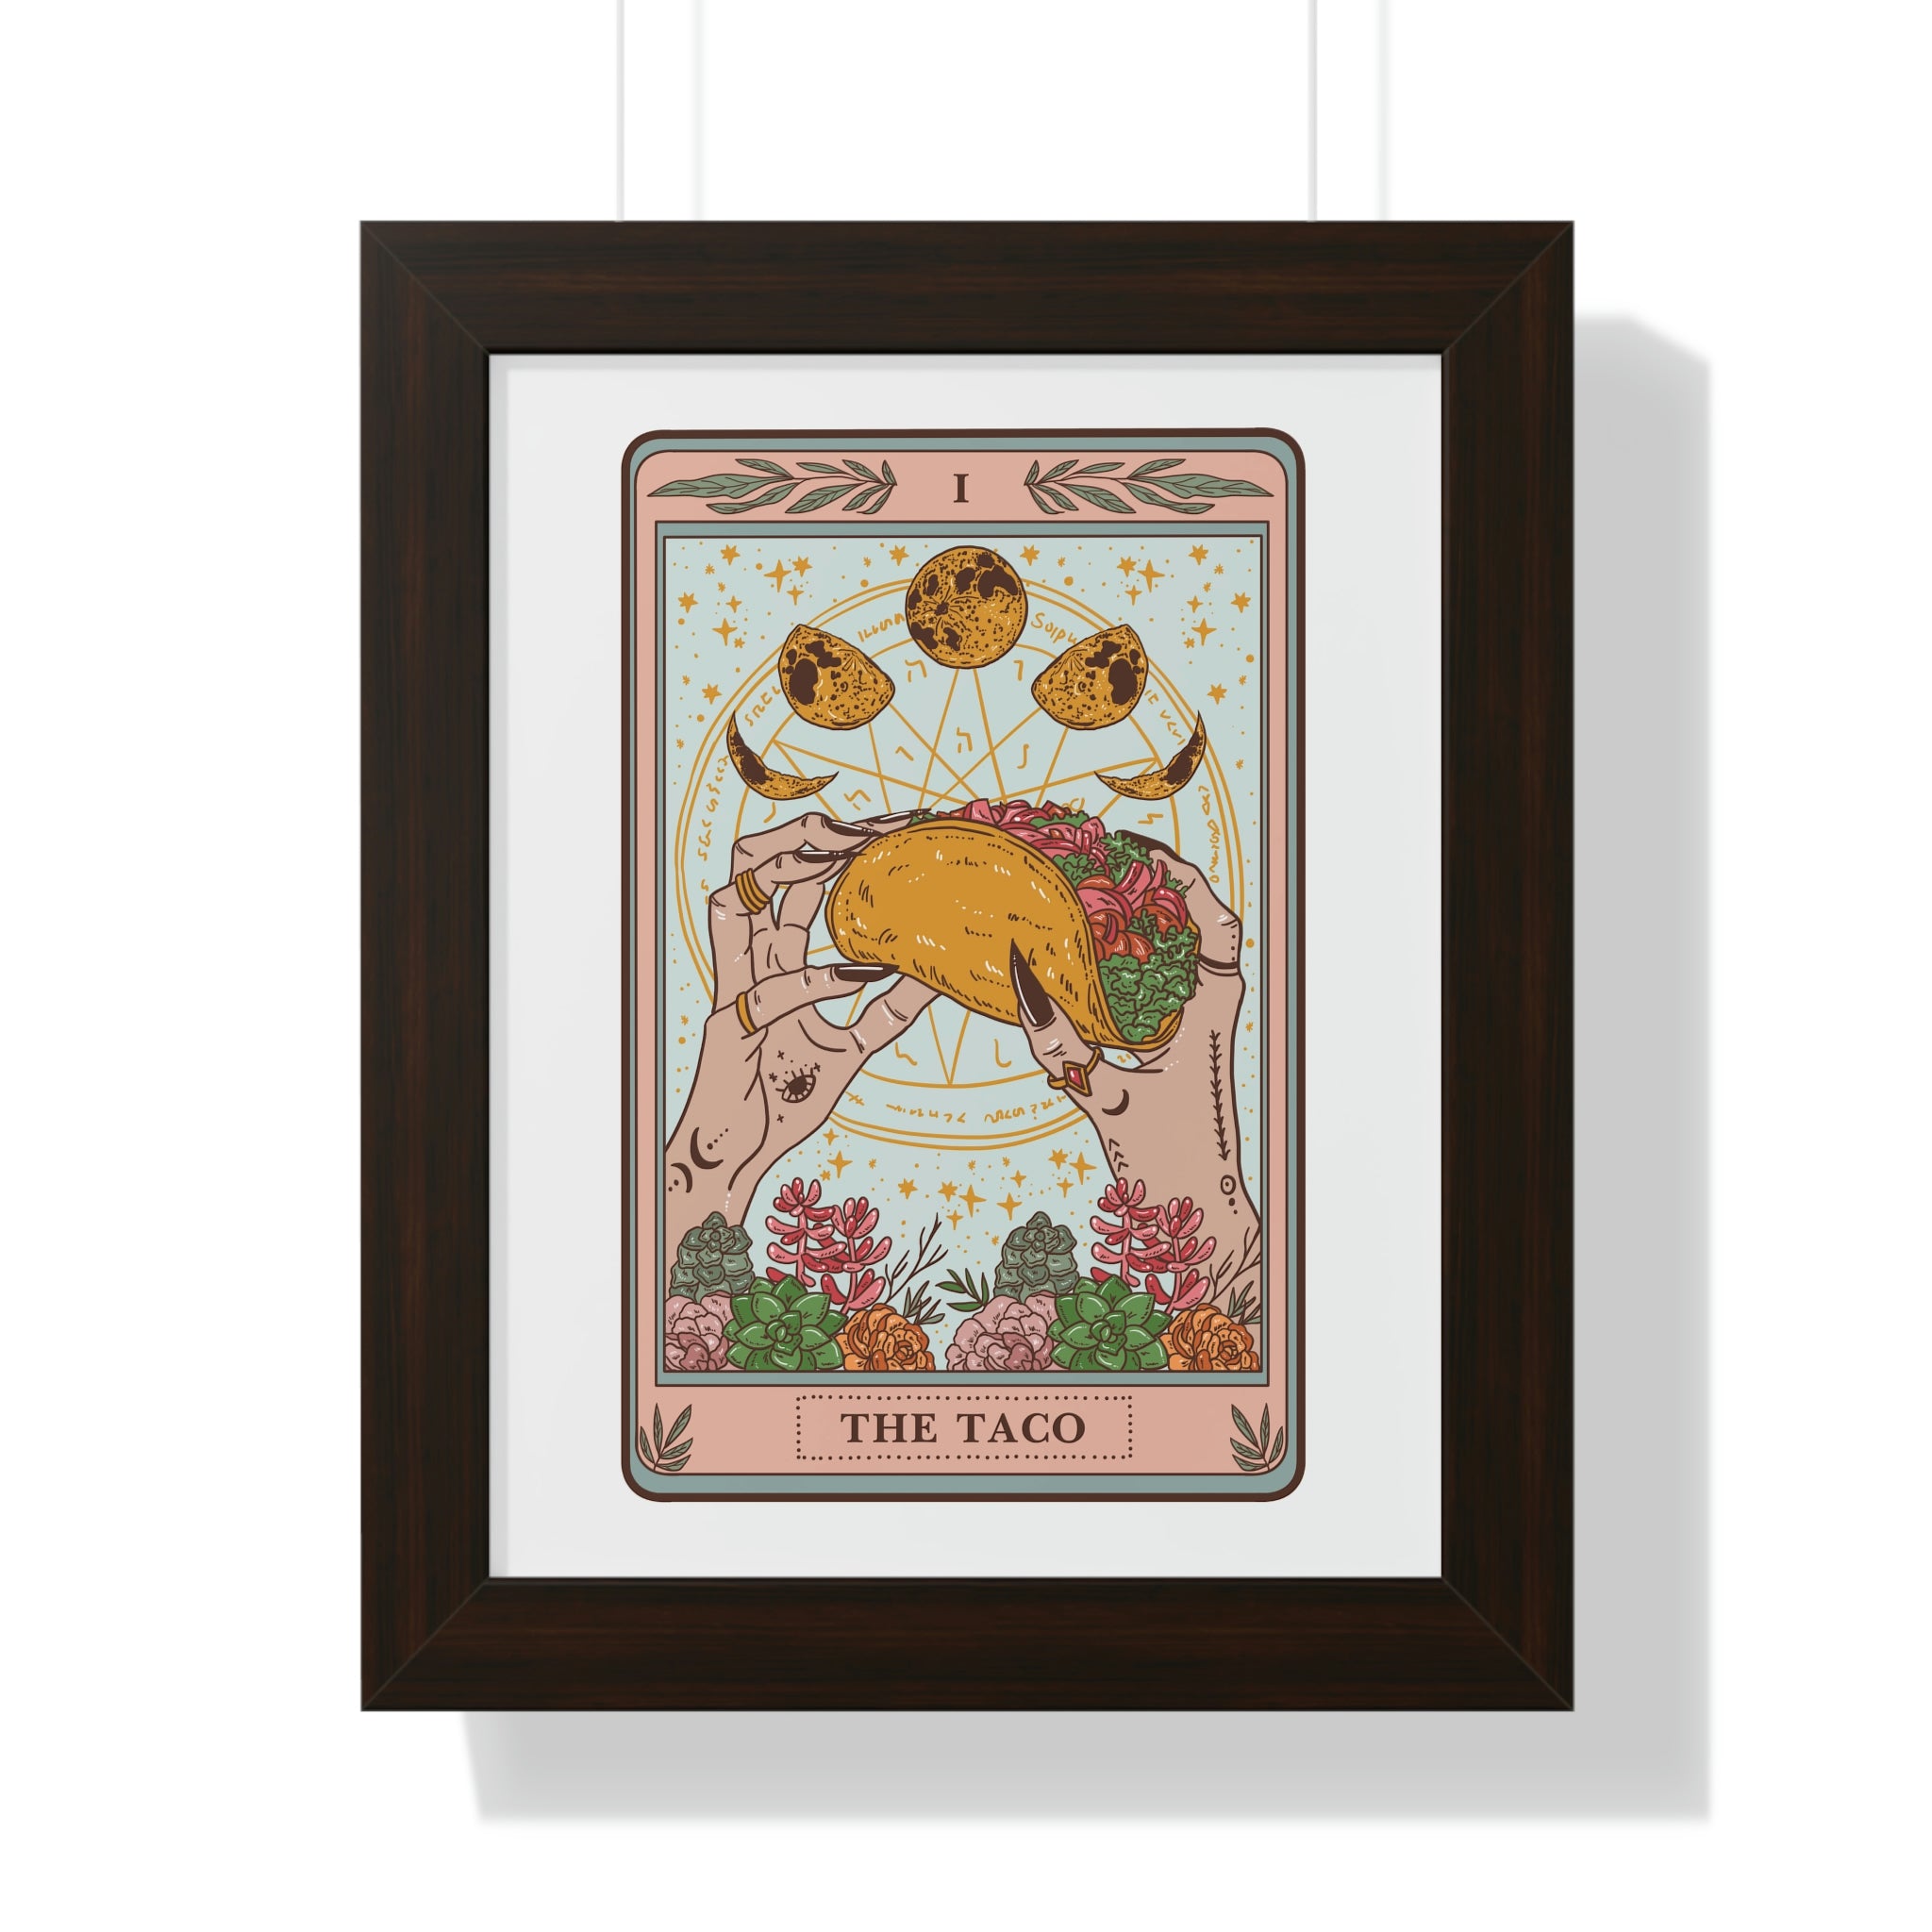 THE TACO // FRAMED POSTER PRINT